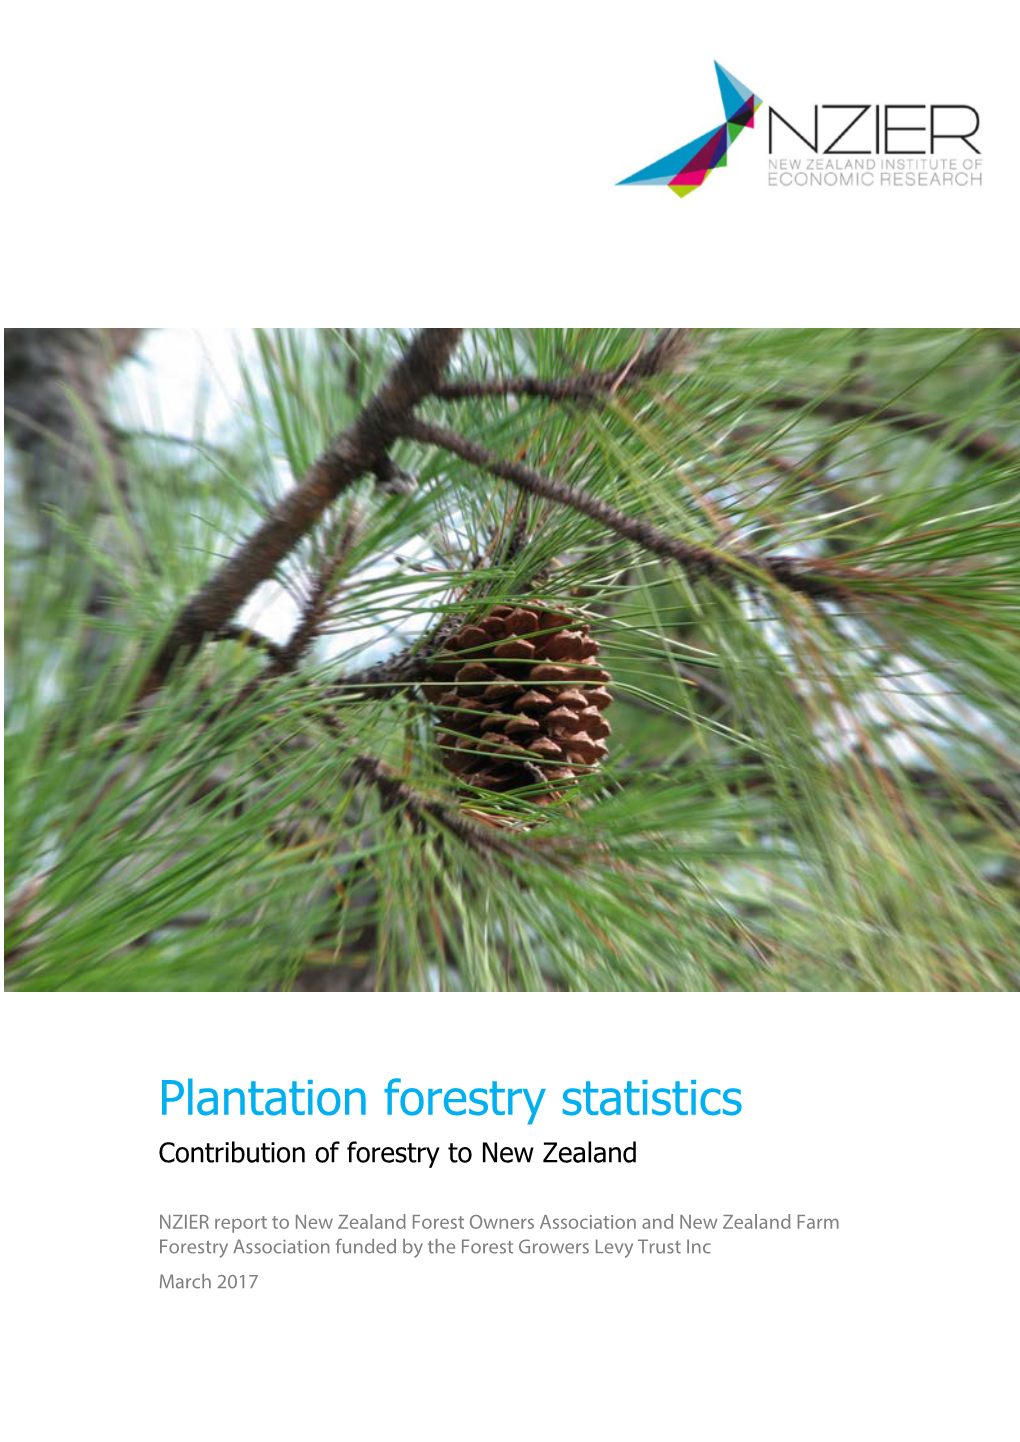 Plantation Forestry Statistics Contribution of Forestry to New Zealand